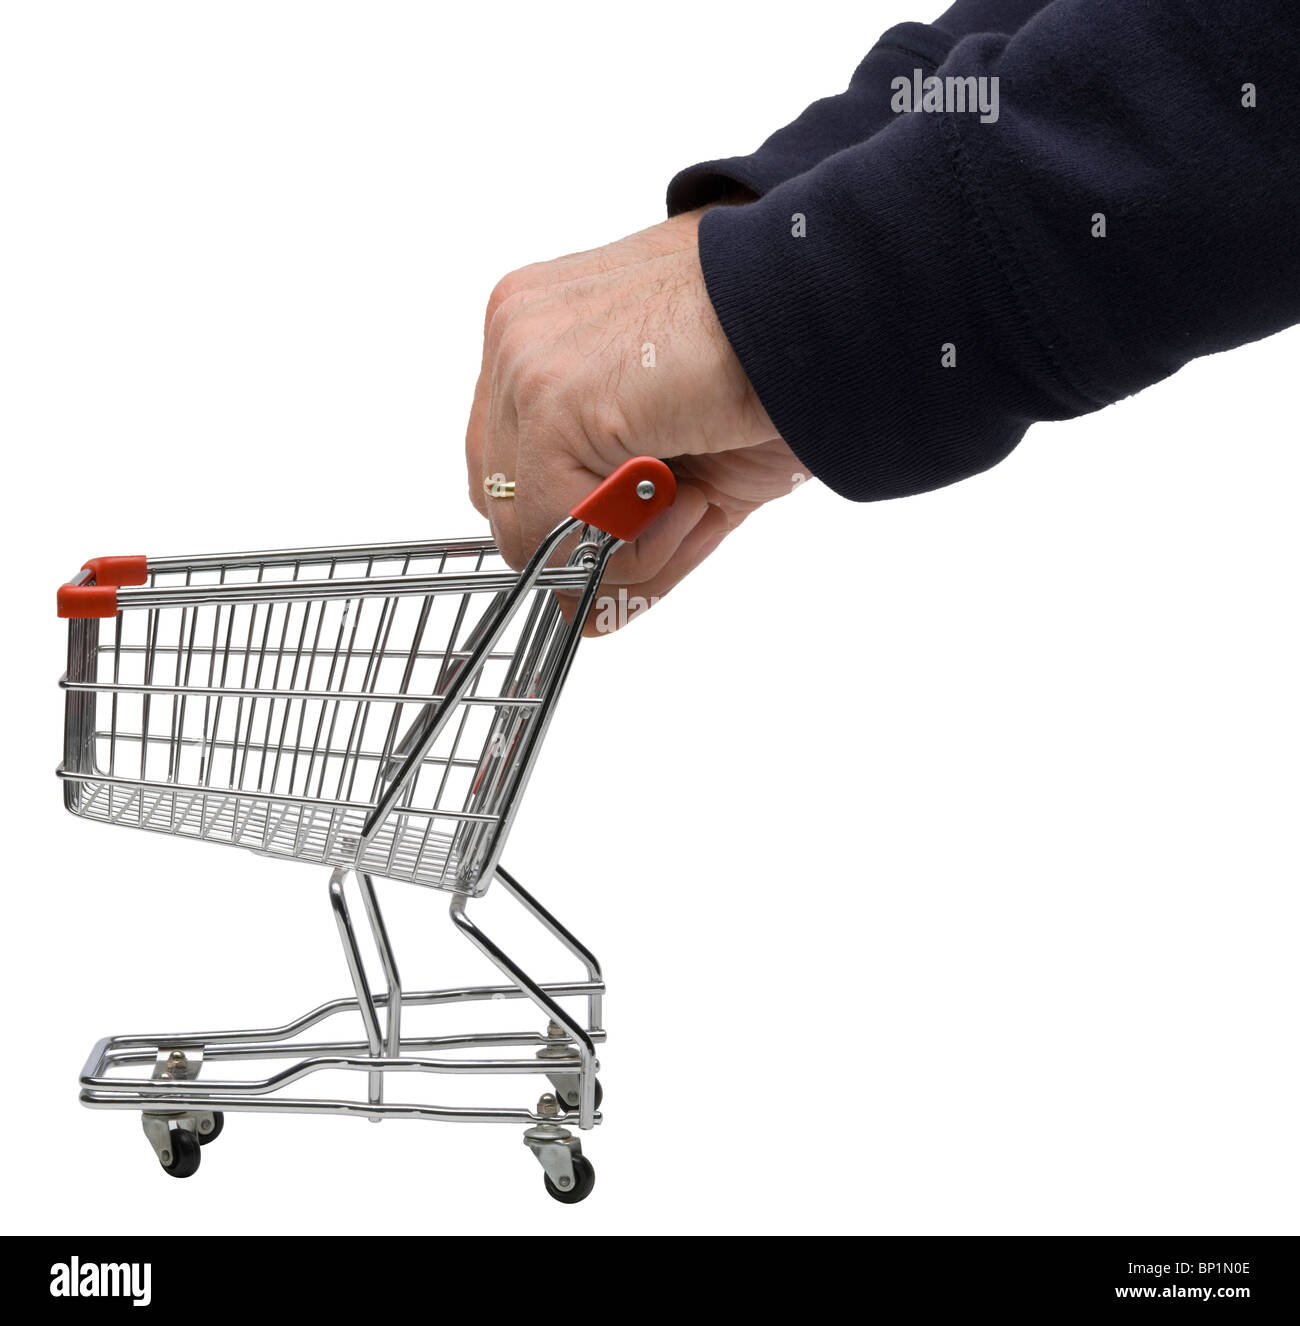 Man's hands pushing shopping trolley Banque D'Images